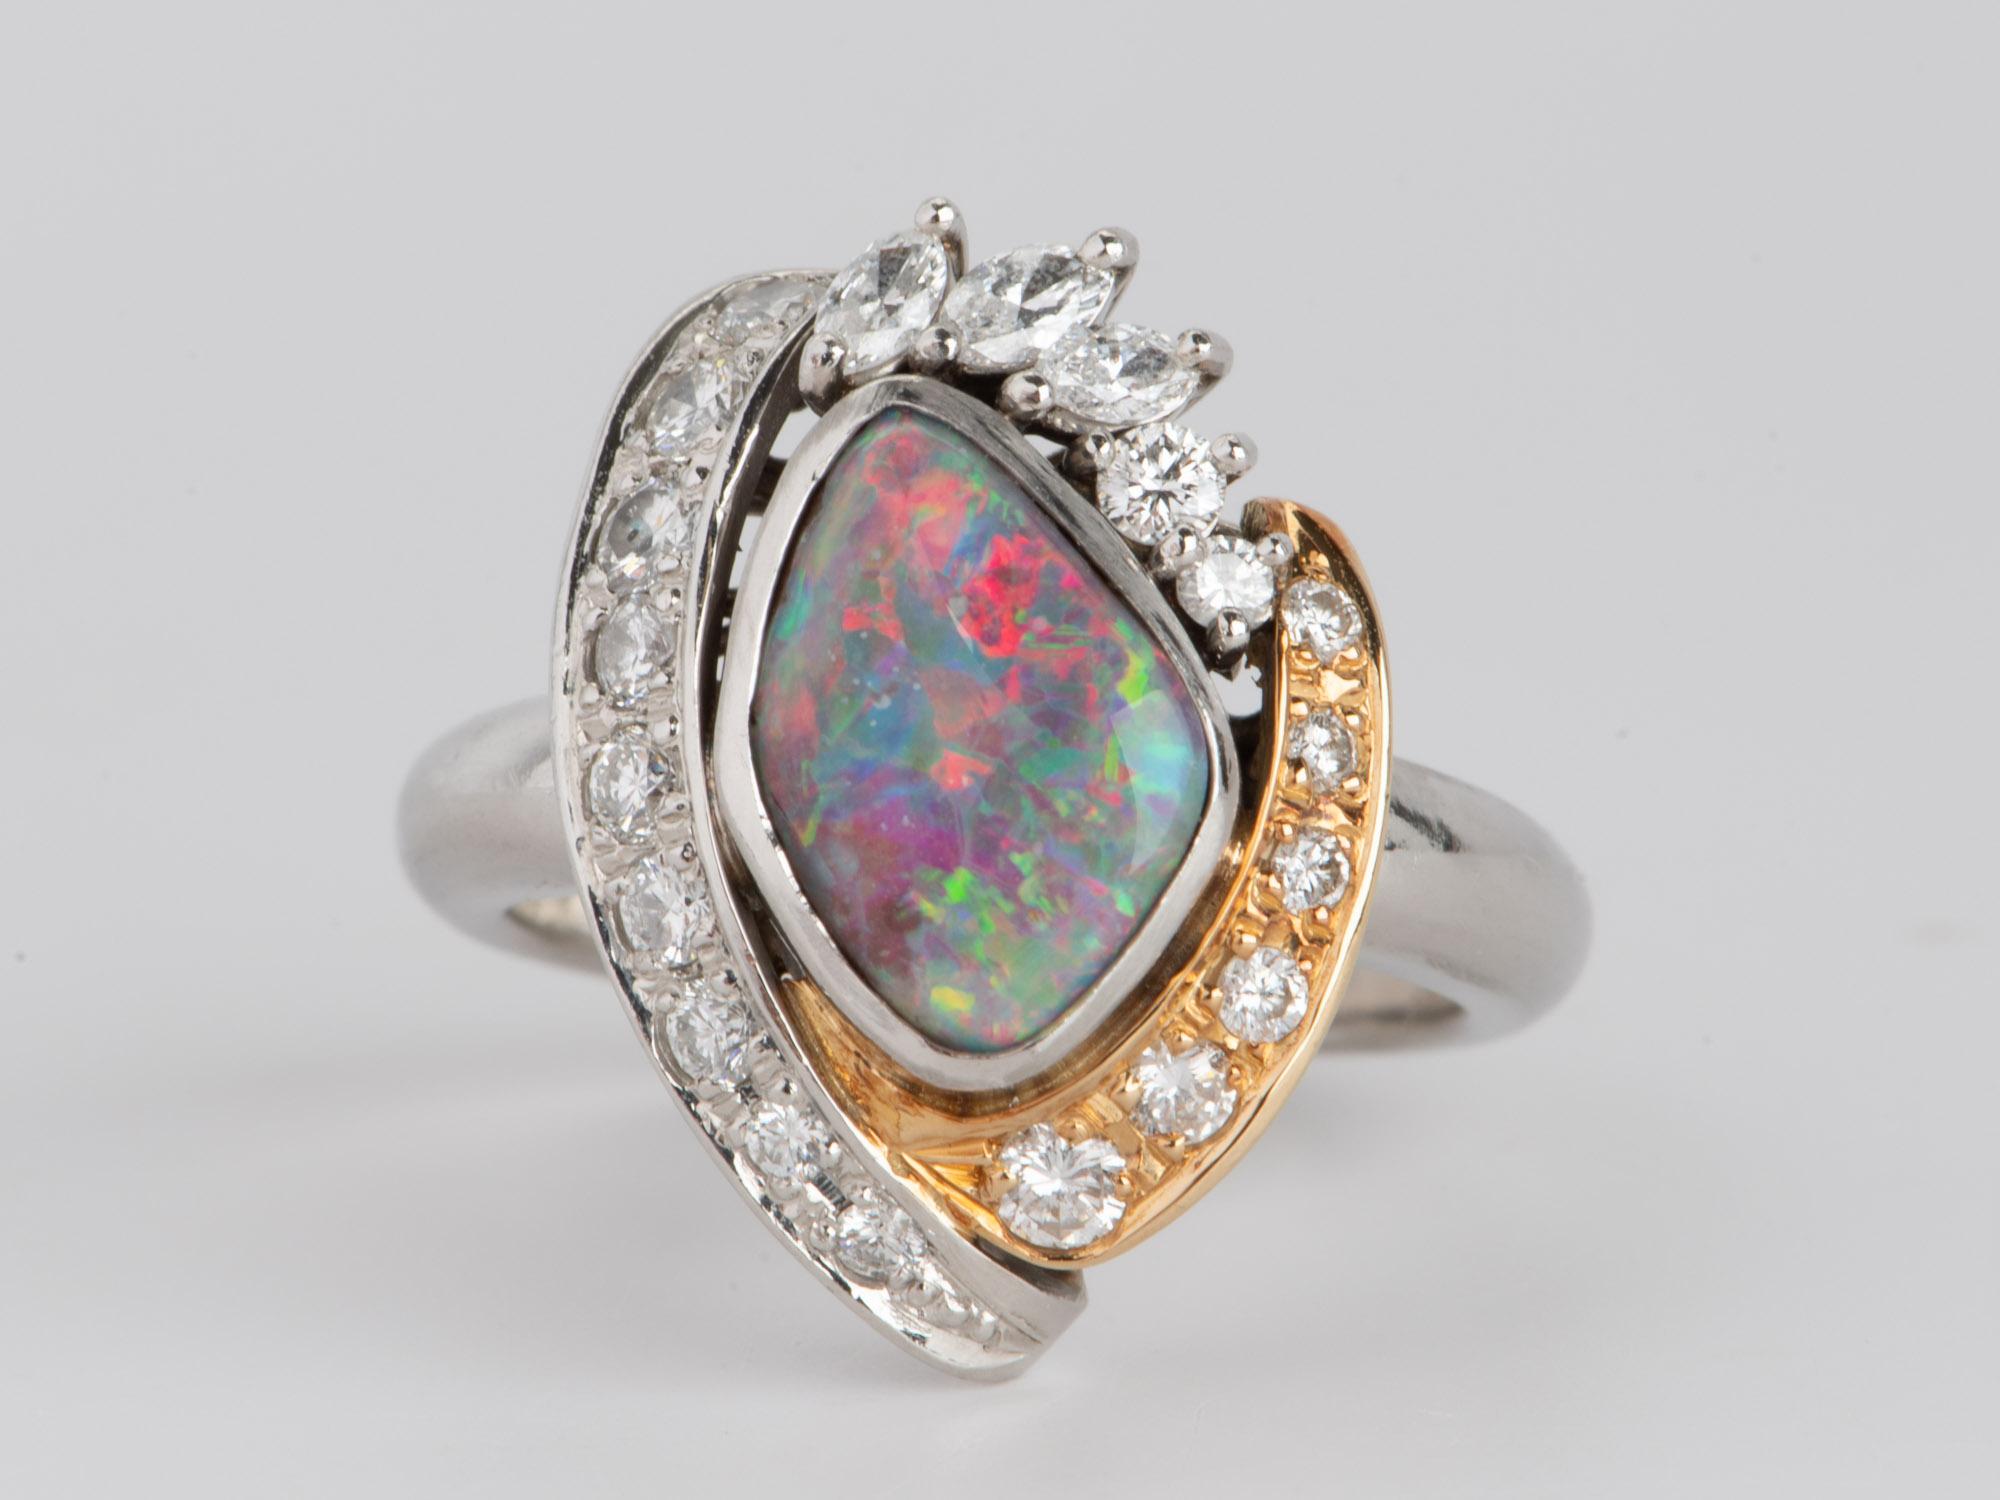 This stunning Australian Boulder Opal Ring is made from 18K Gold and Platinum and is a statement-making piece of jewelry. Its impressive craftsmanship features an impressive natural boulder opal with bright red and green flashes, designed to glitter